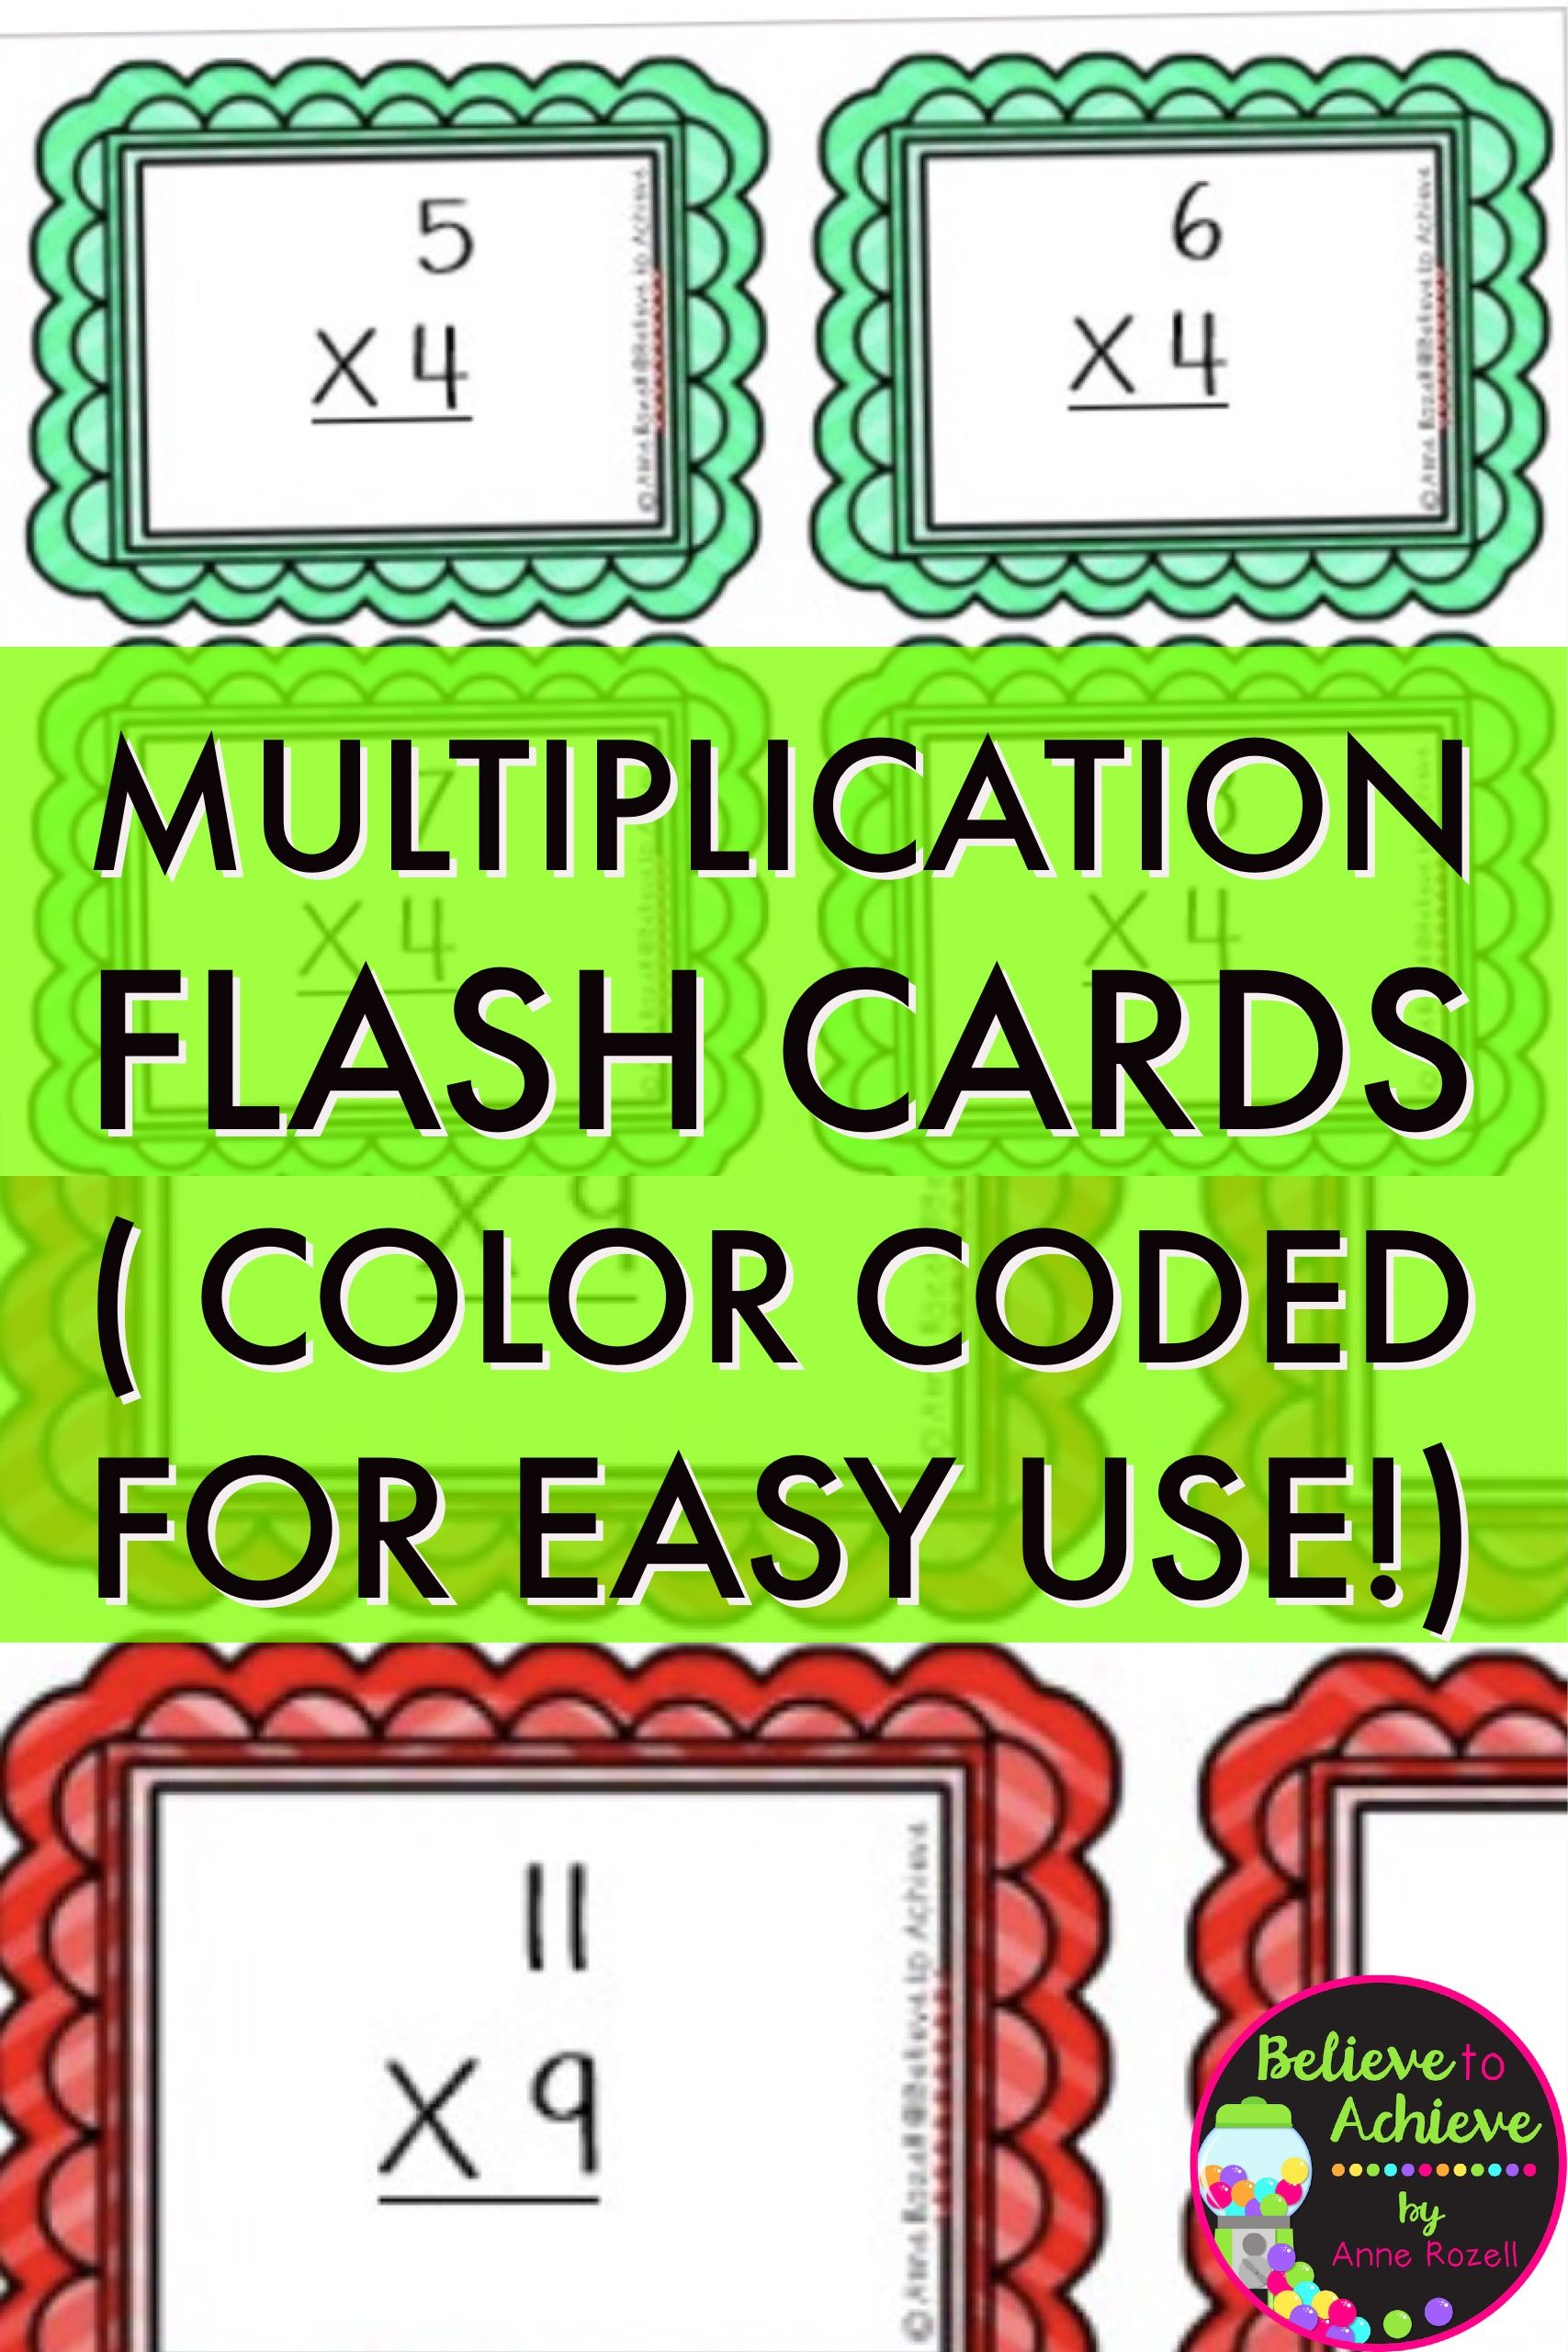 Multiplication Flash Cards! Color Coded For Easy Use! Facts